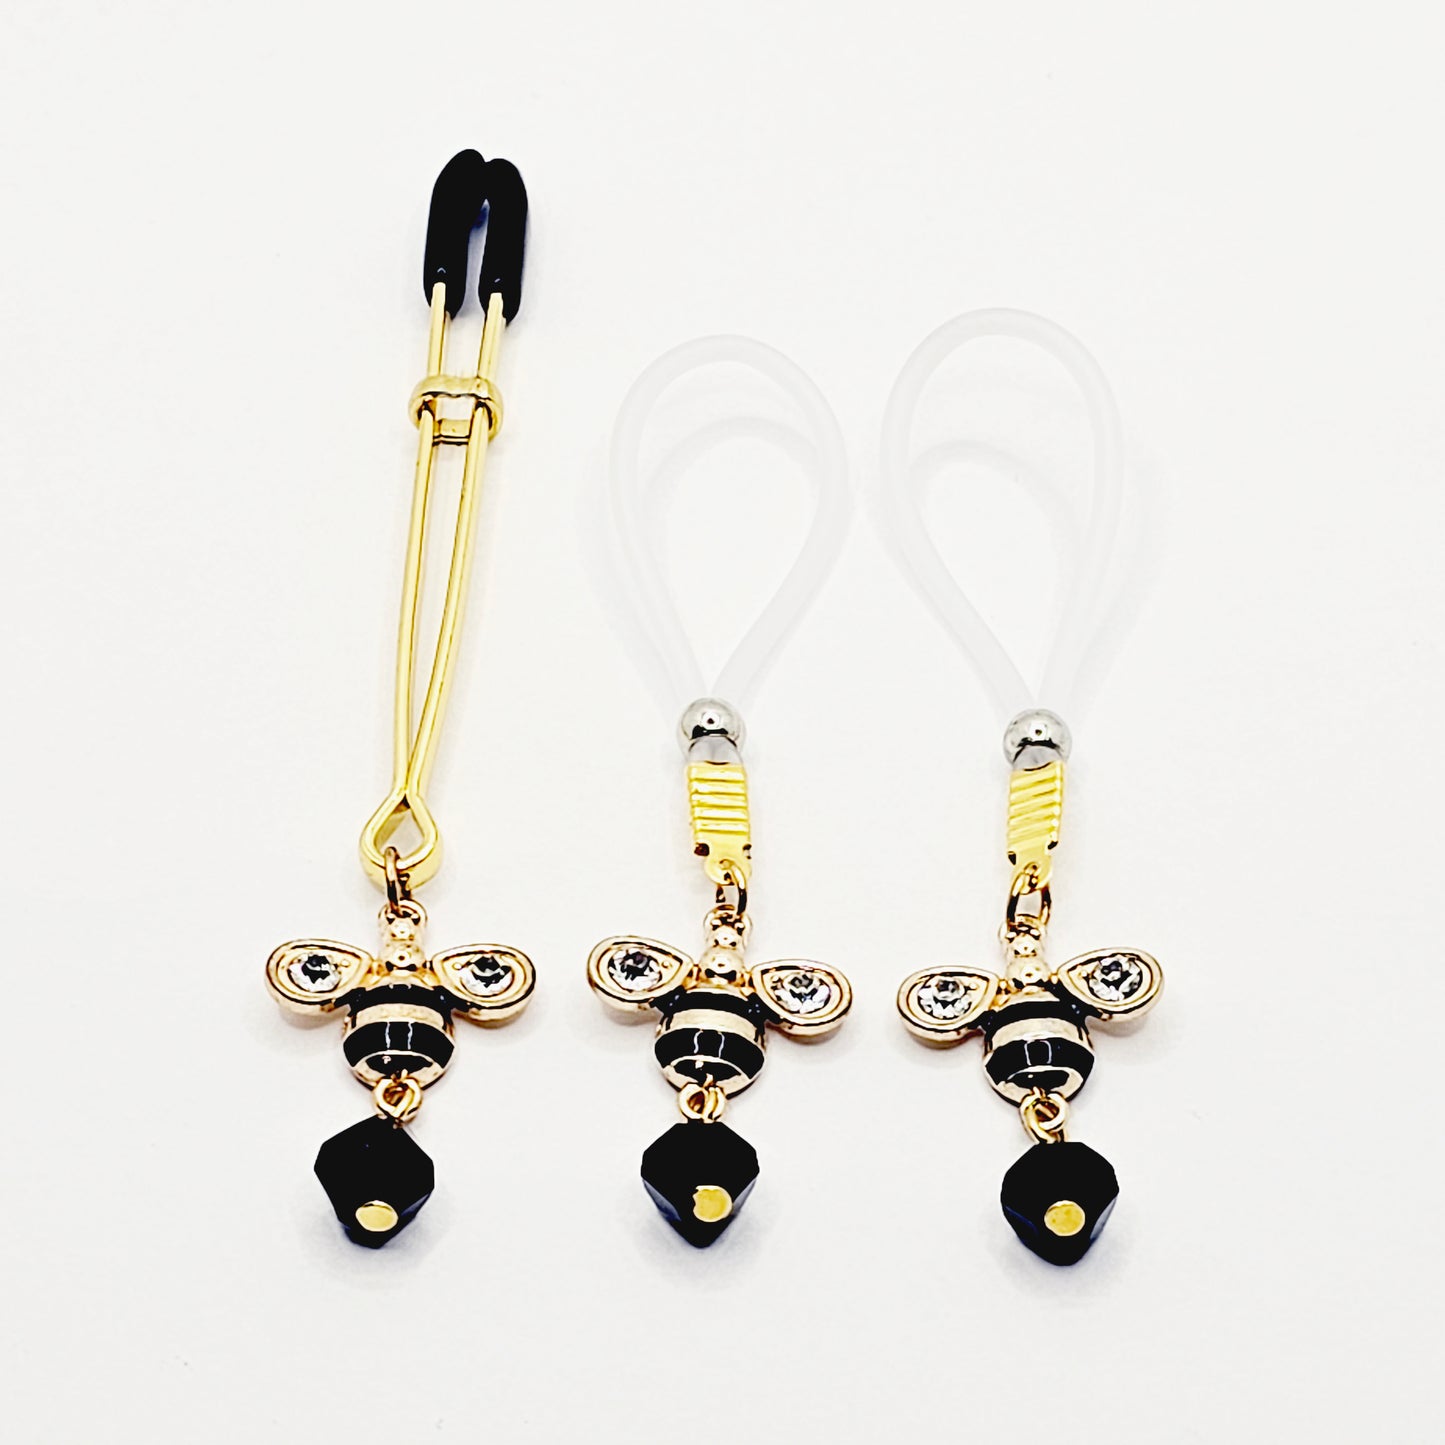 Clit Clamp and Nipple Dangle Set with Bee. Gold Tweezer Clitoral Clamp and Nipple Nooses or Nipple Clamps